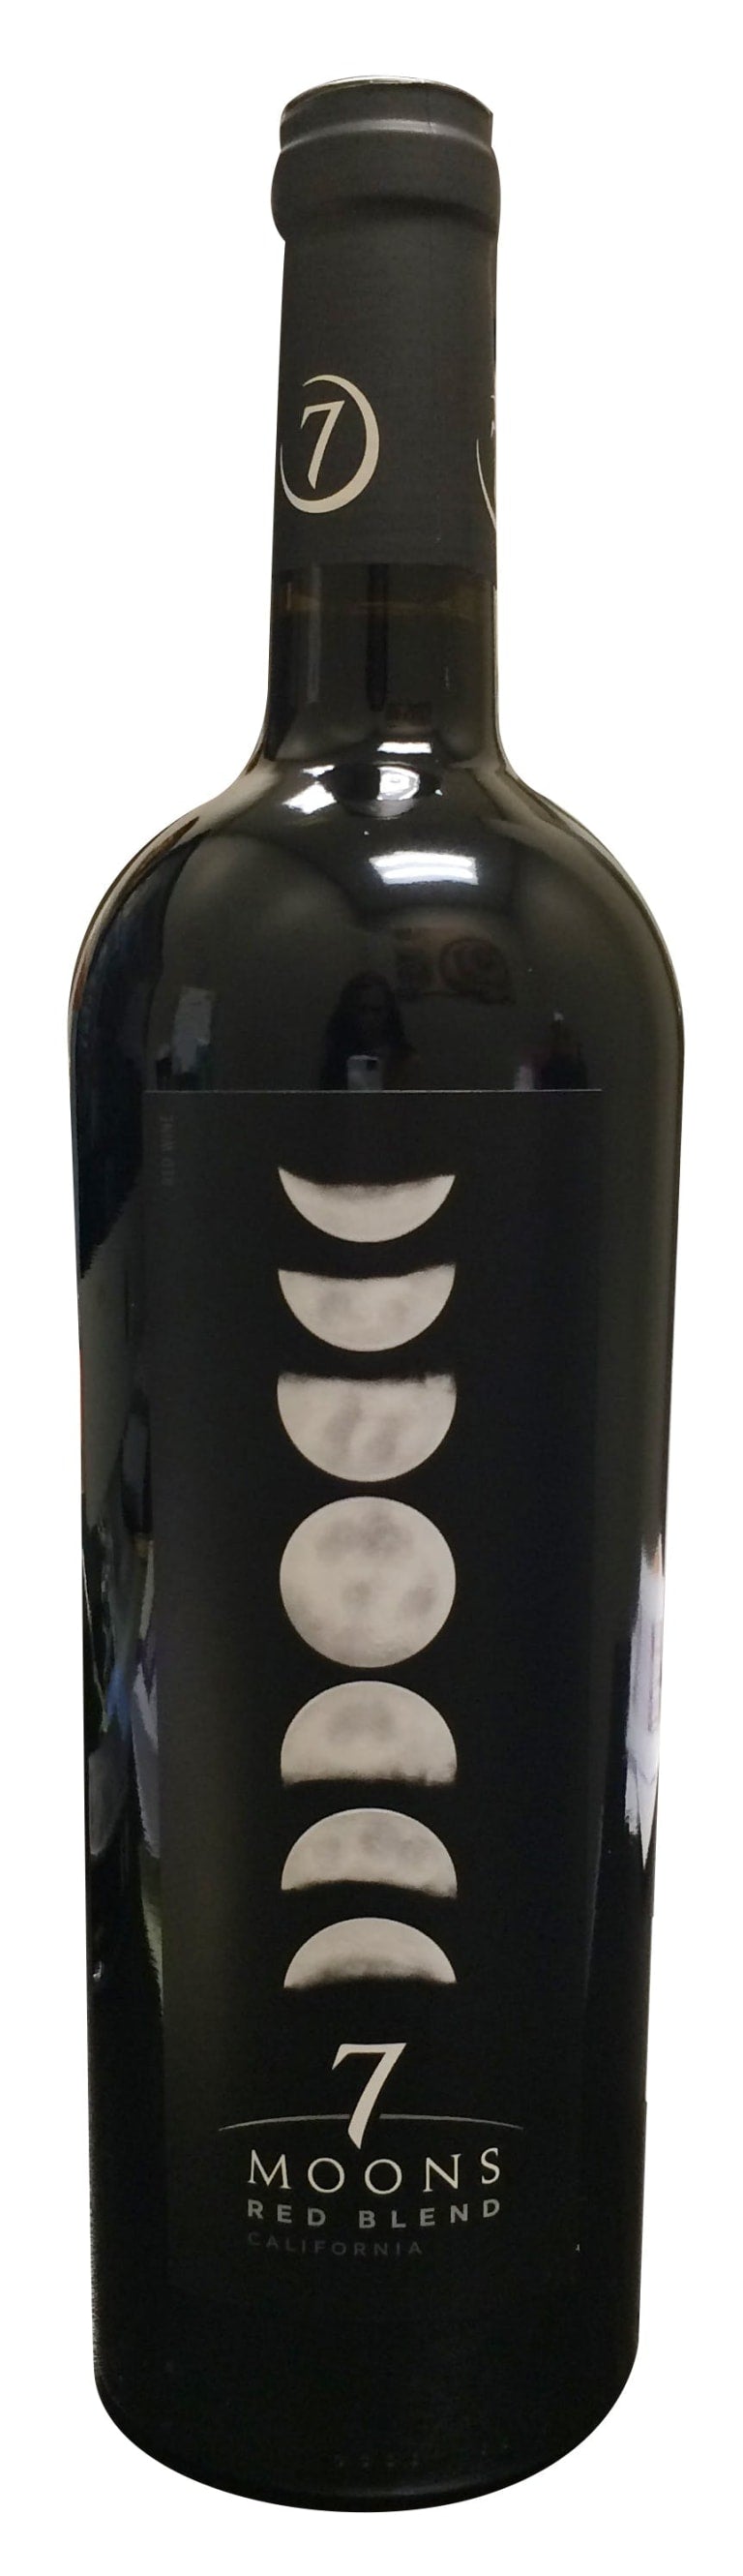 7 Moons 2020 Red Blend 750ml